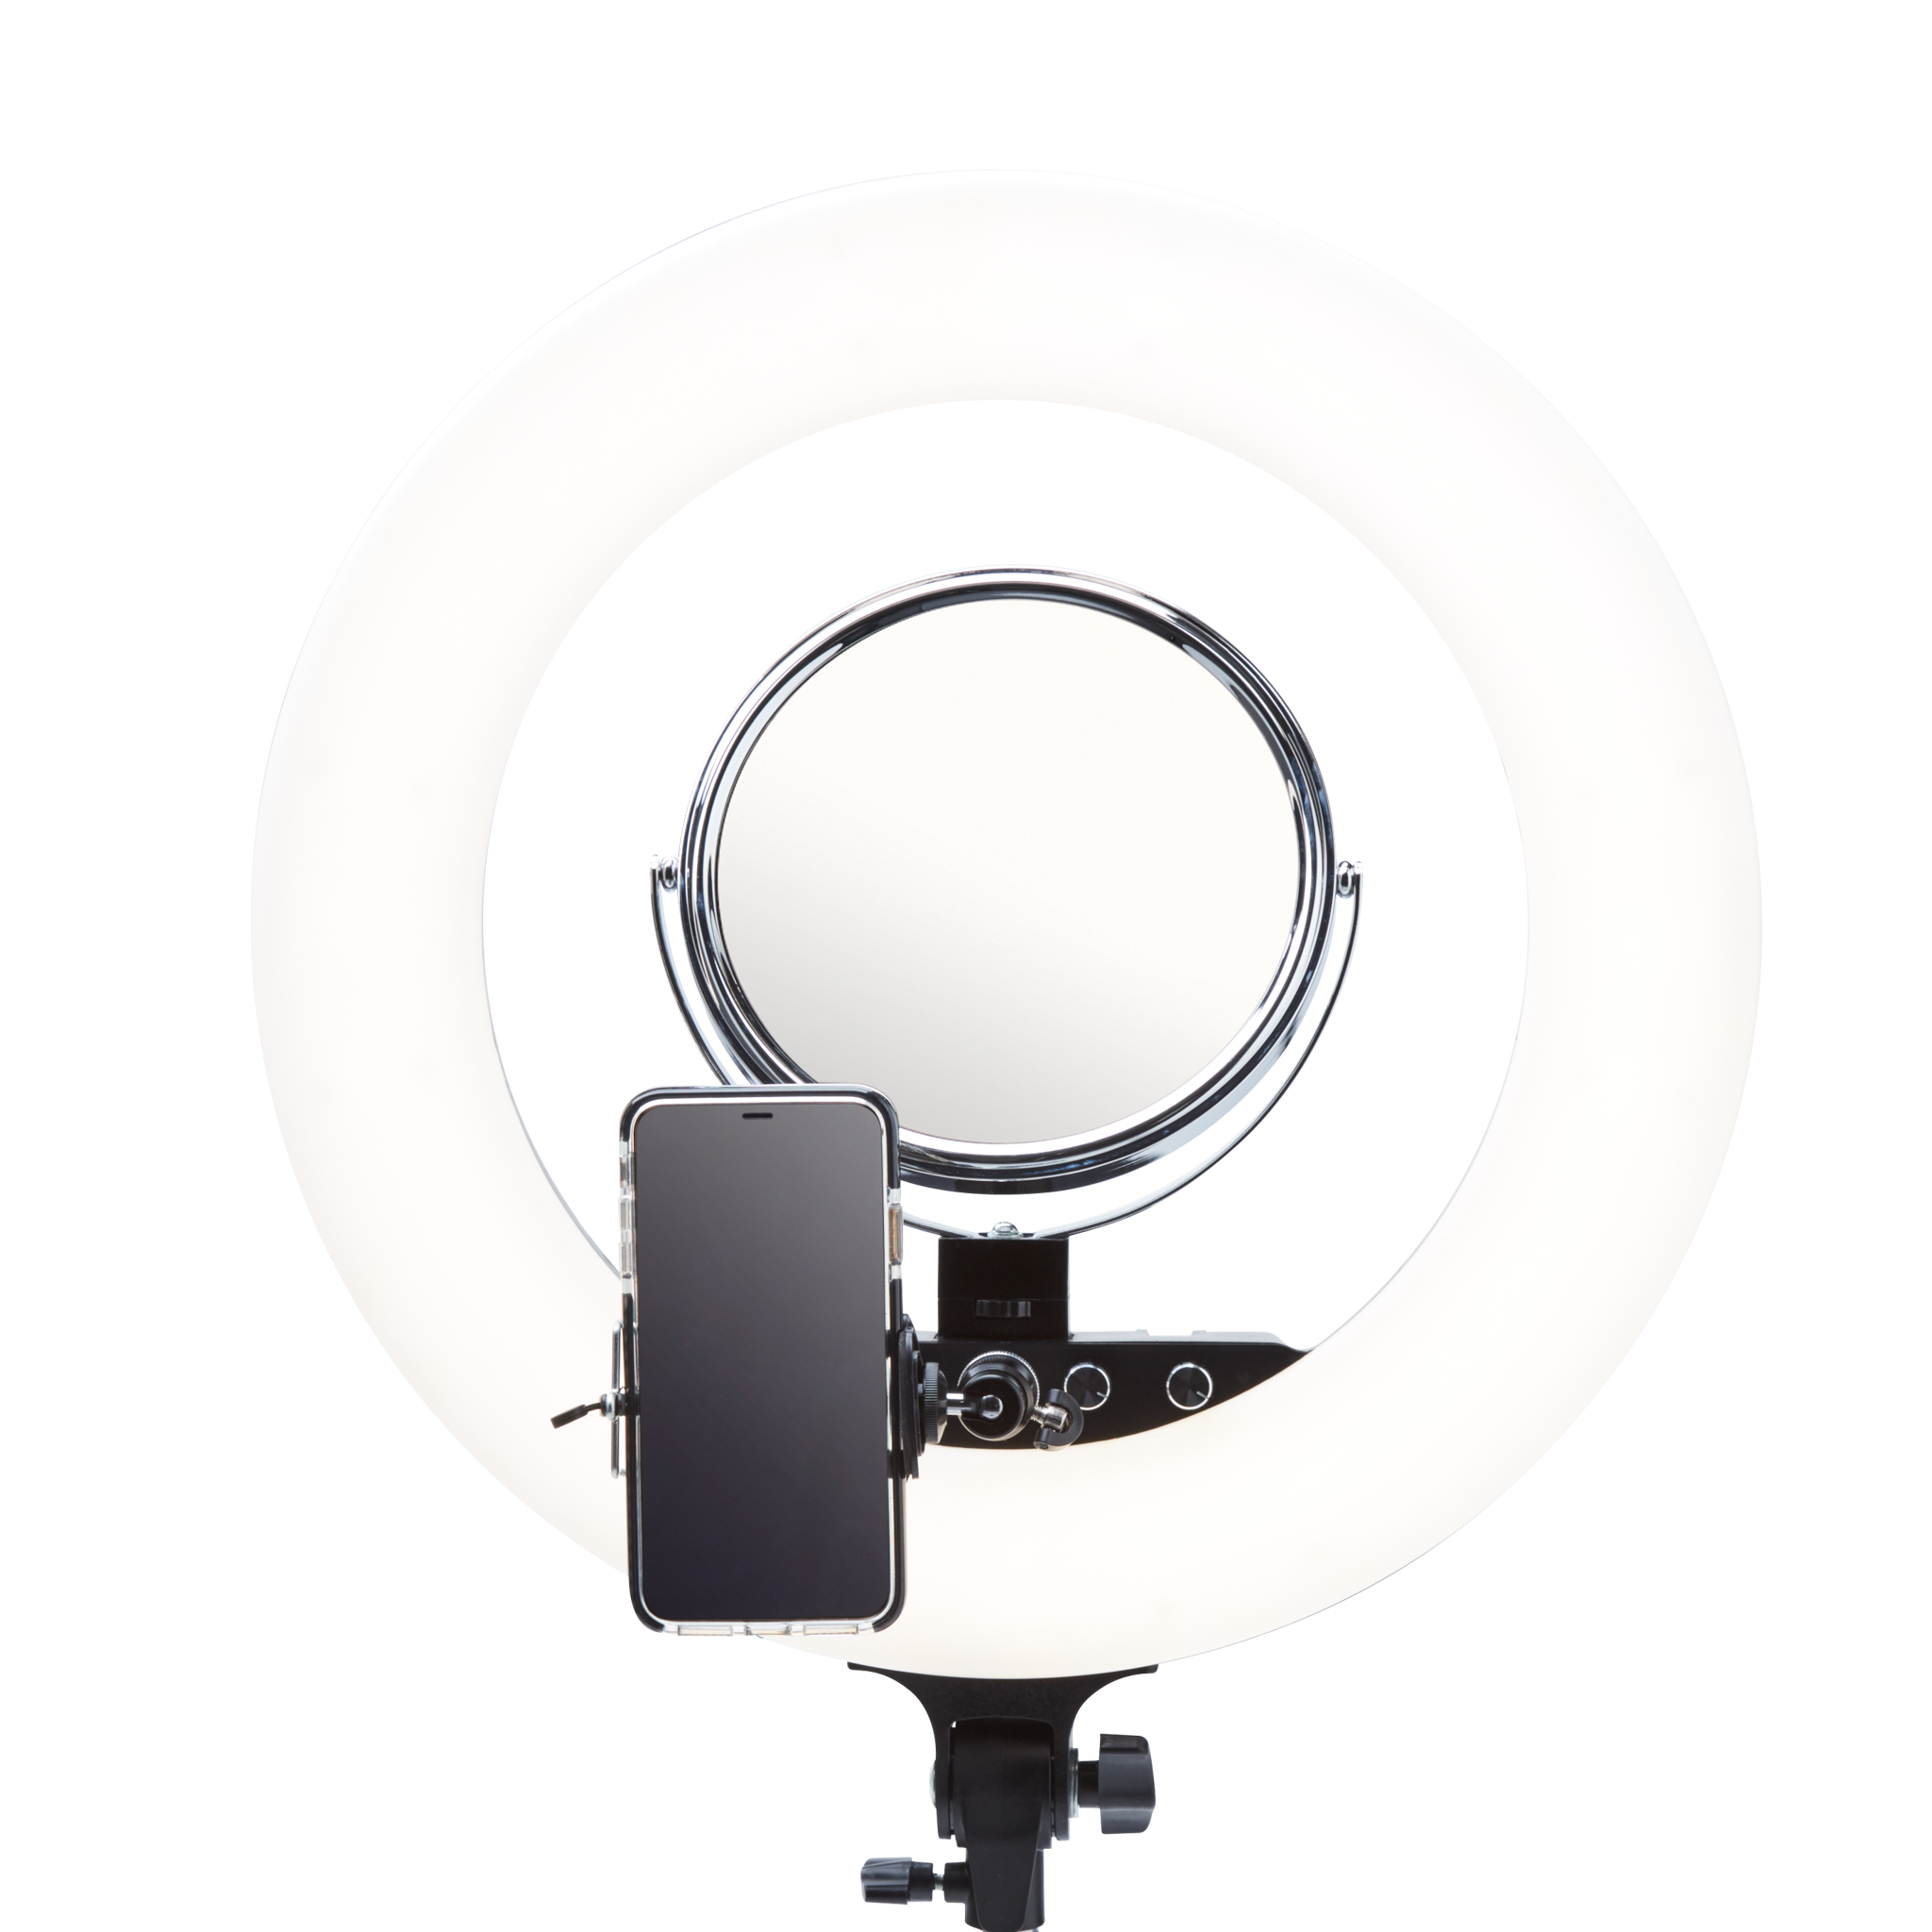 Amazon.com - Zadro Solana 9.75 Inch Round LED Ring Light Vanity Counter-Top  Mirror, 360 Swivel 7.5 Inch 2 Sided Magnified Glass Mirrors, 6500K 4500K  3200K Smart Dimmer Lamp, Plug in (8X/1X, White/Satin